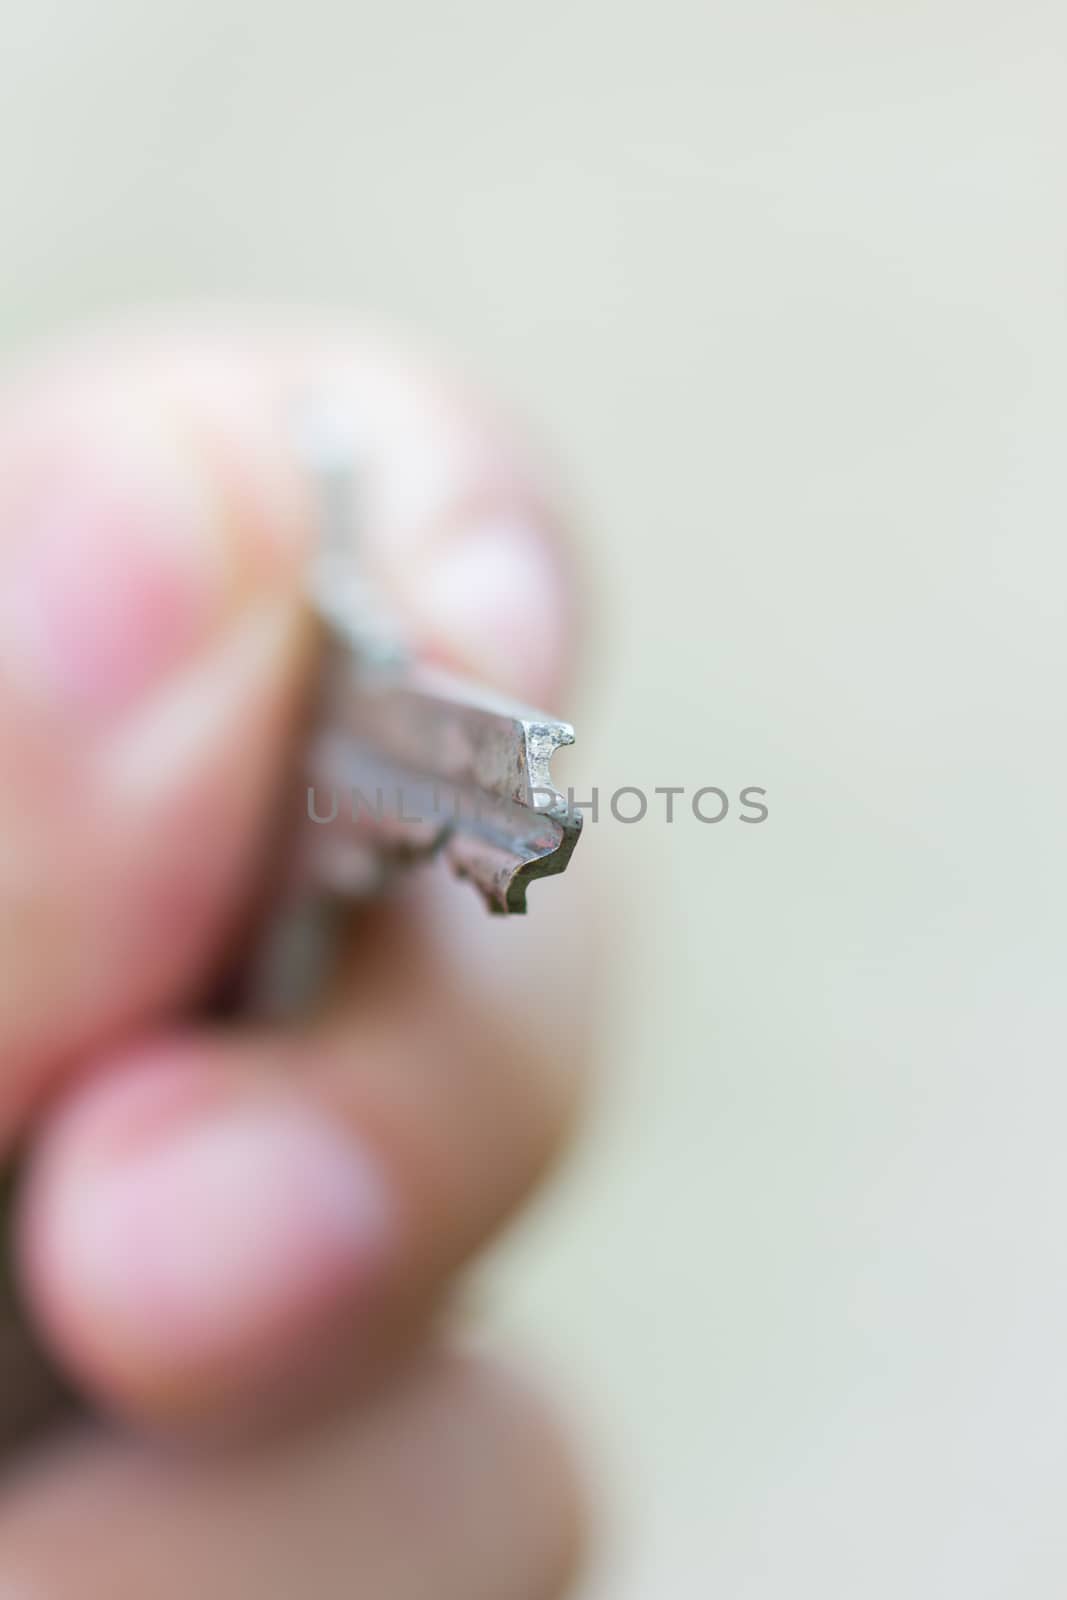 Closeup of key in hand to open. Shallow depth of field